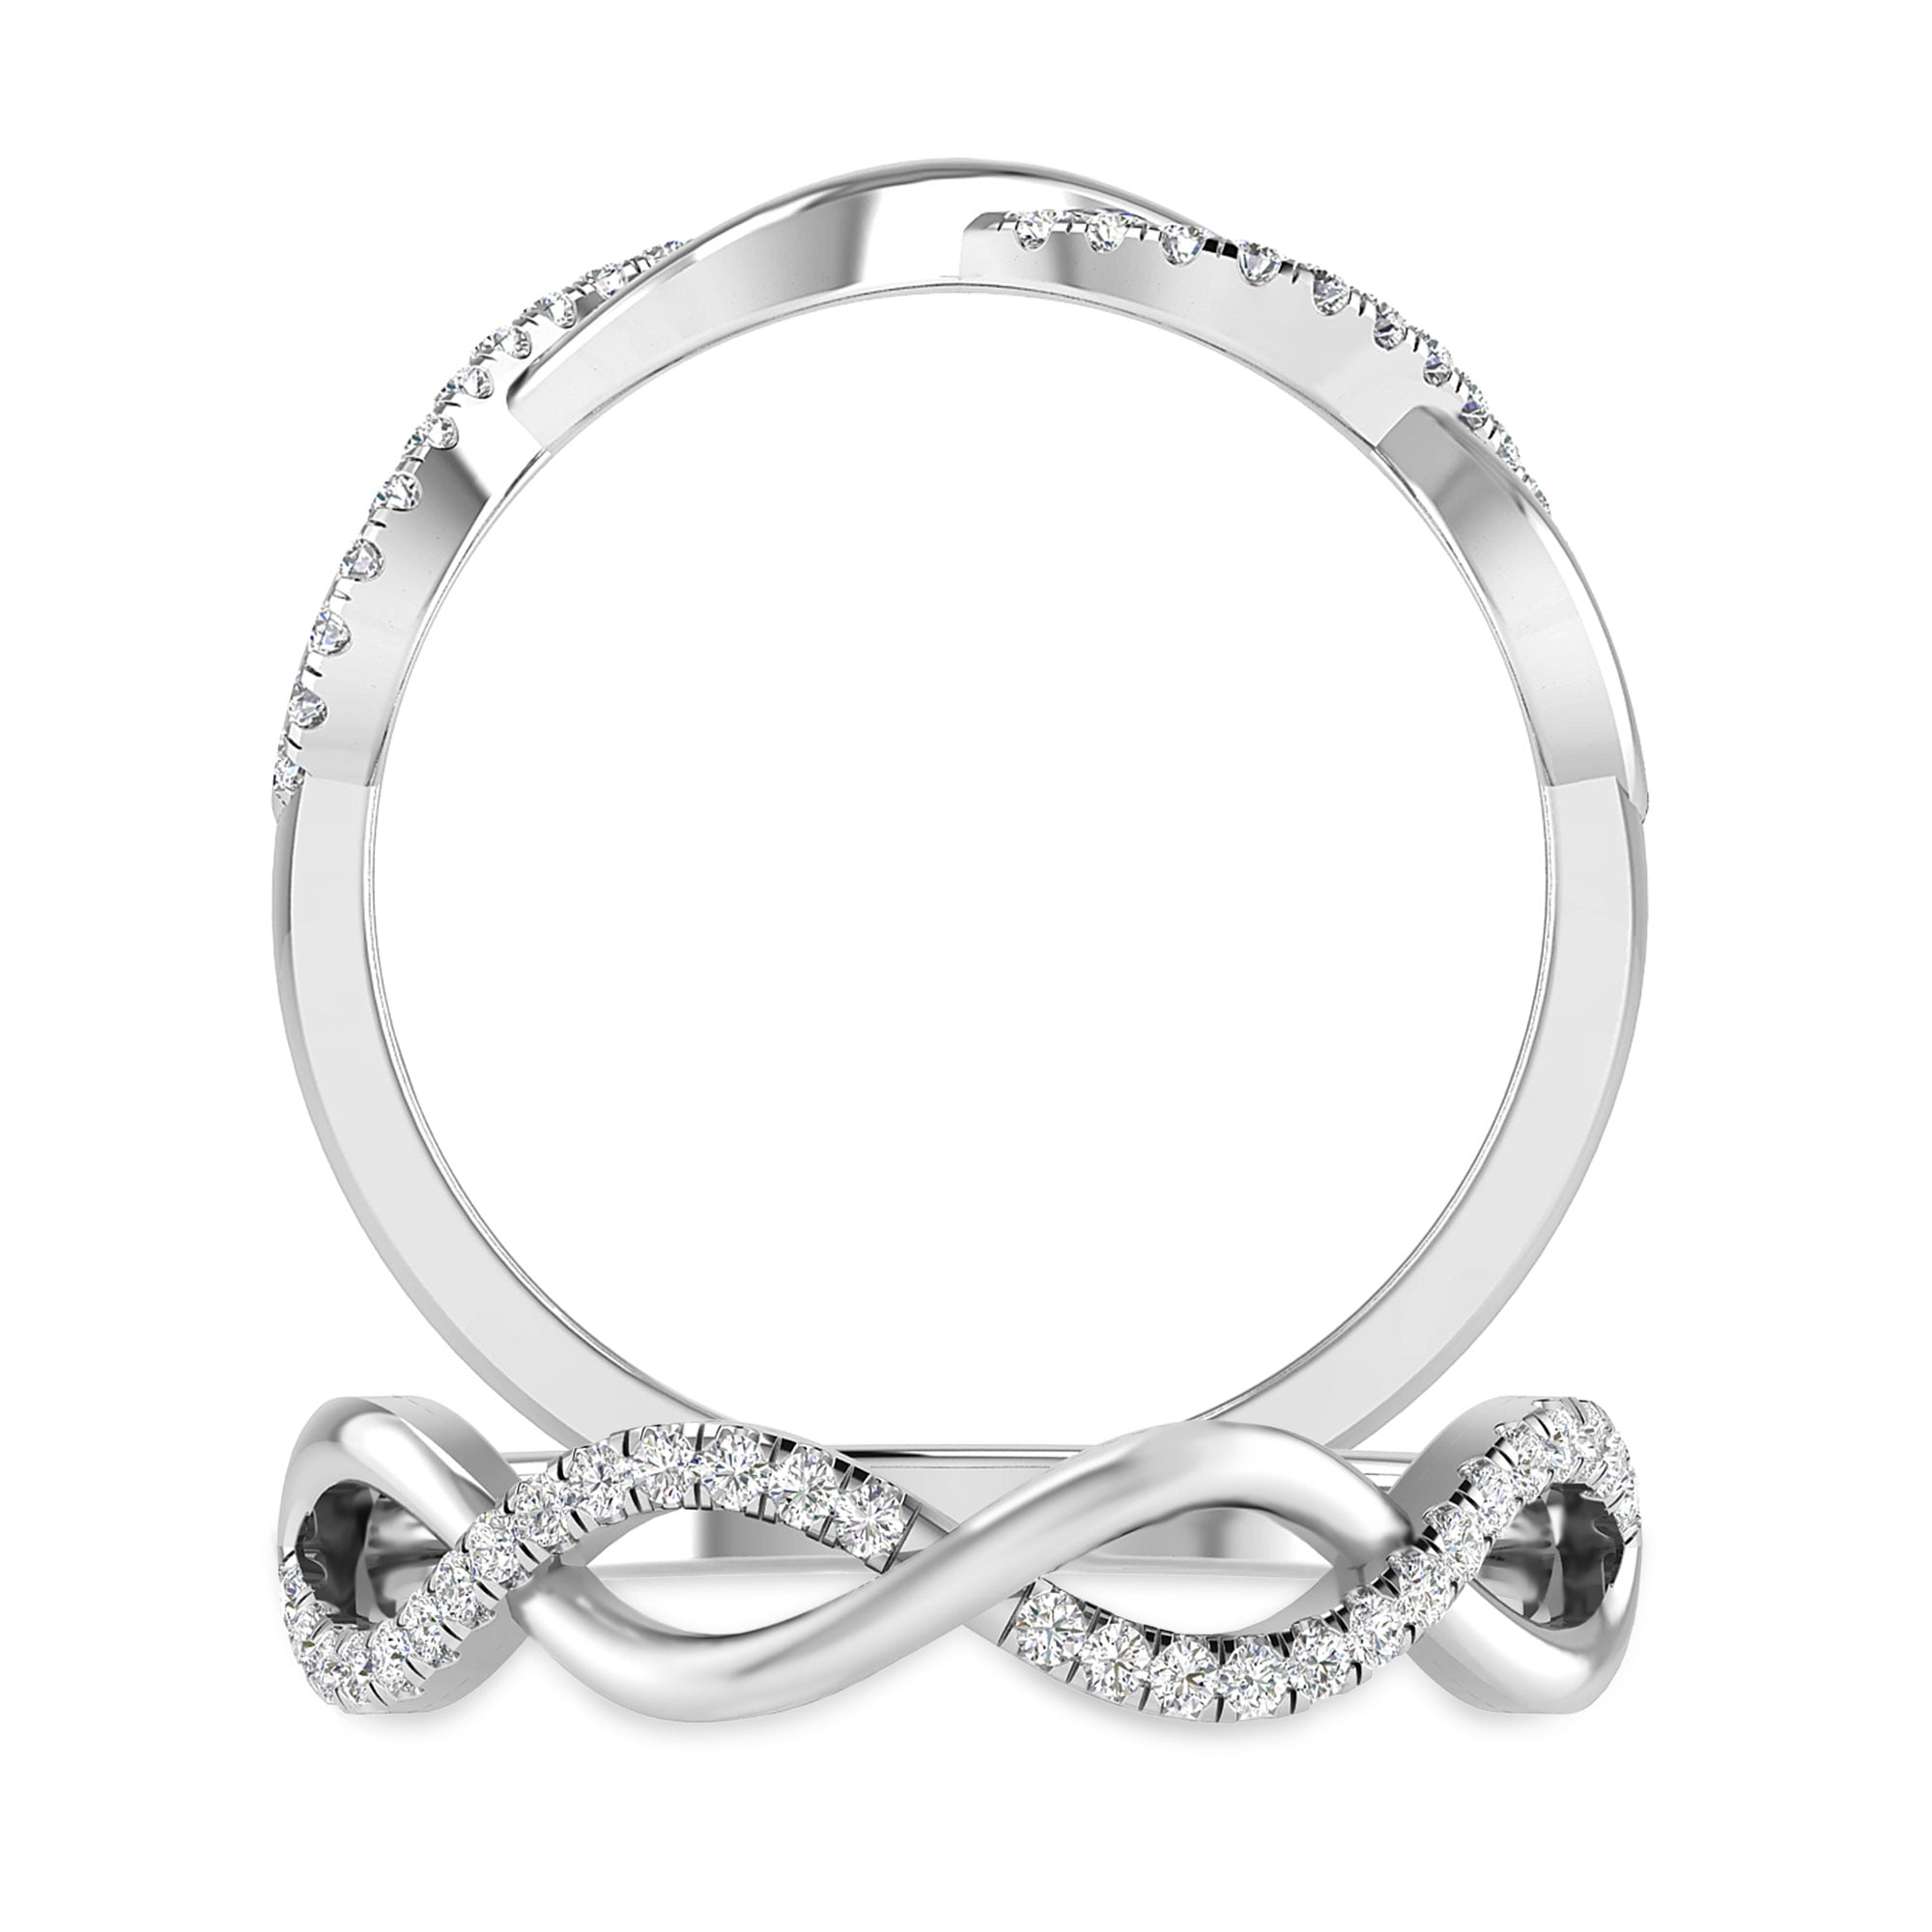 1/10 Carat 10kt White Gold Diamond Petite Twist Wedding Anniversary Stackable Band. ( H-I Color, I2-I3 Clarity )